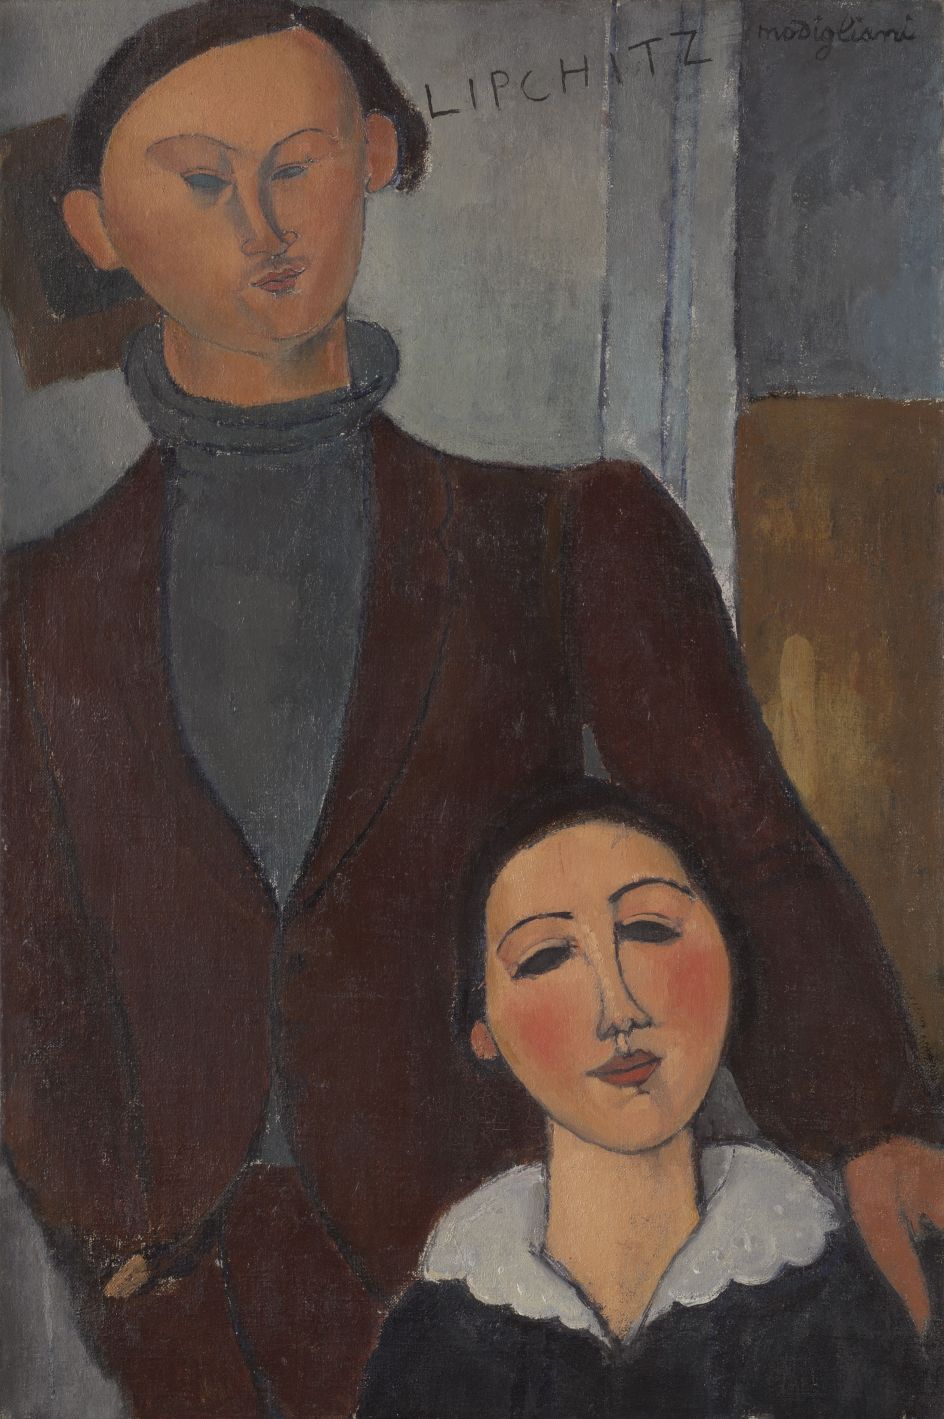 Jacques and Berthe Lipchitz 1916 Oil on canvas 813 x 543 mm The Art Institute of Chicago